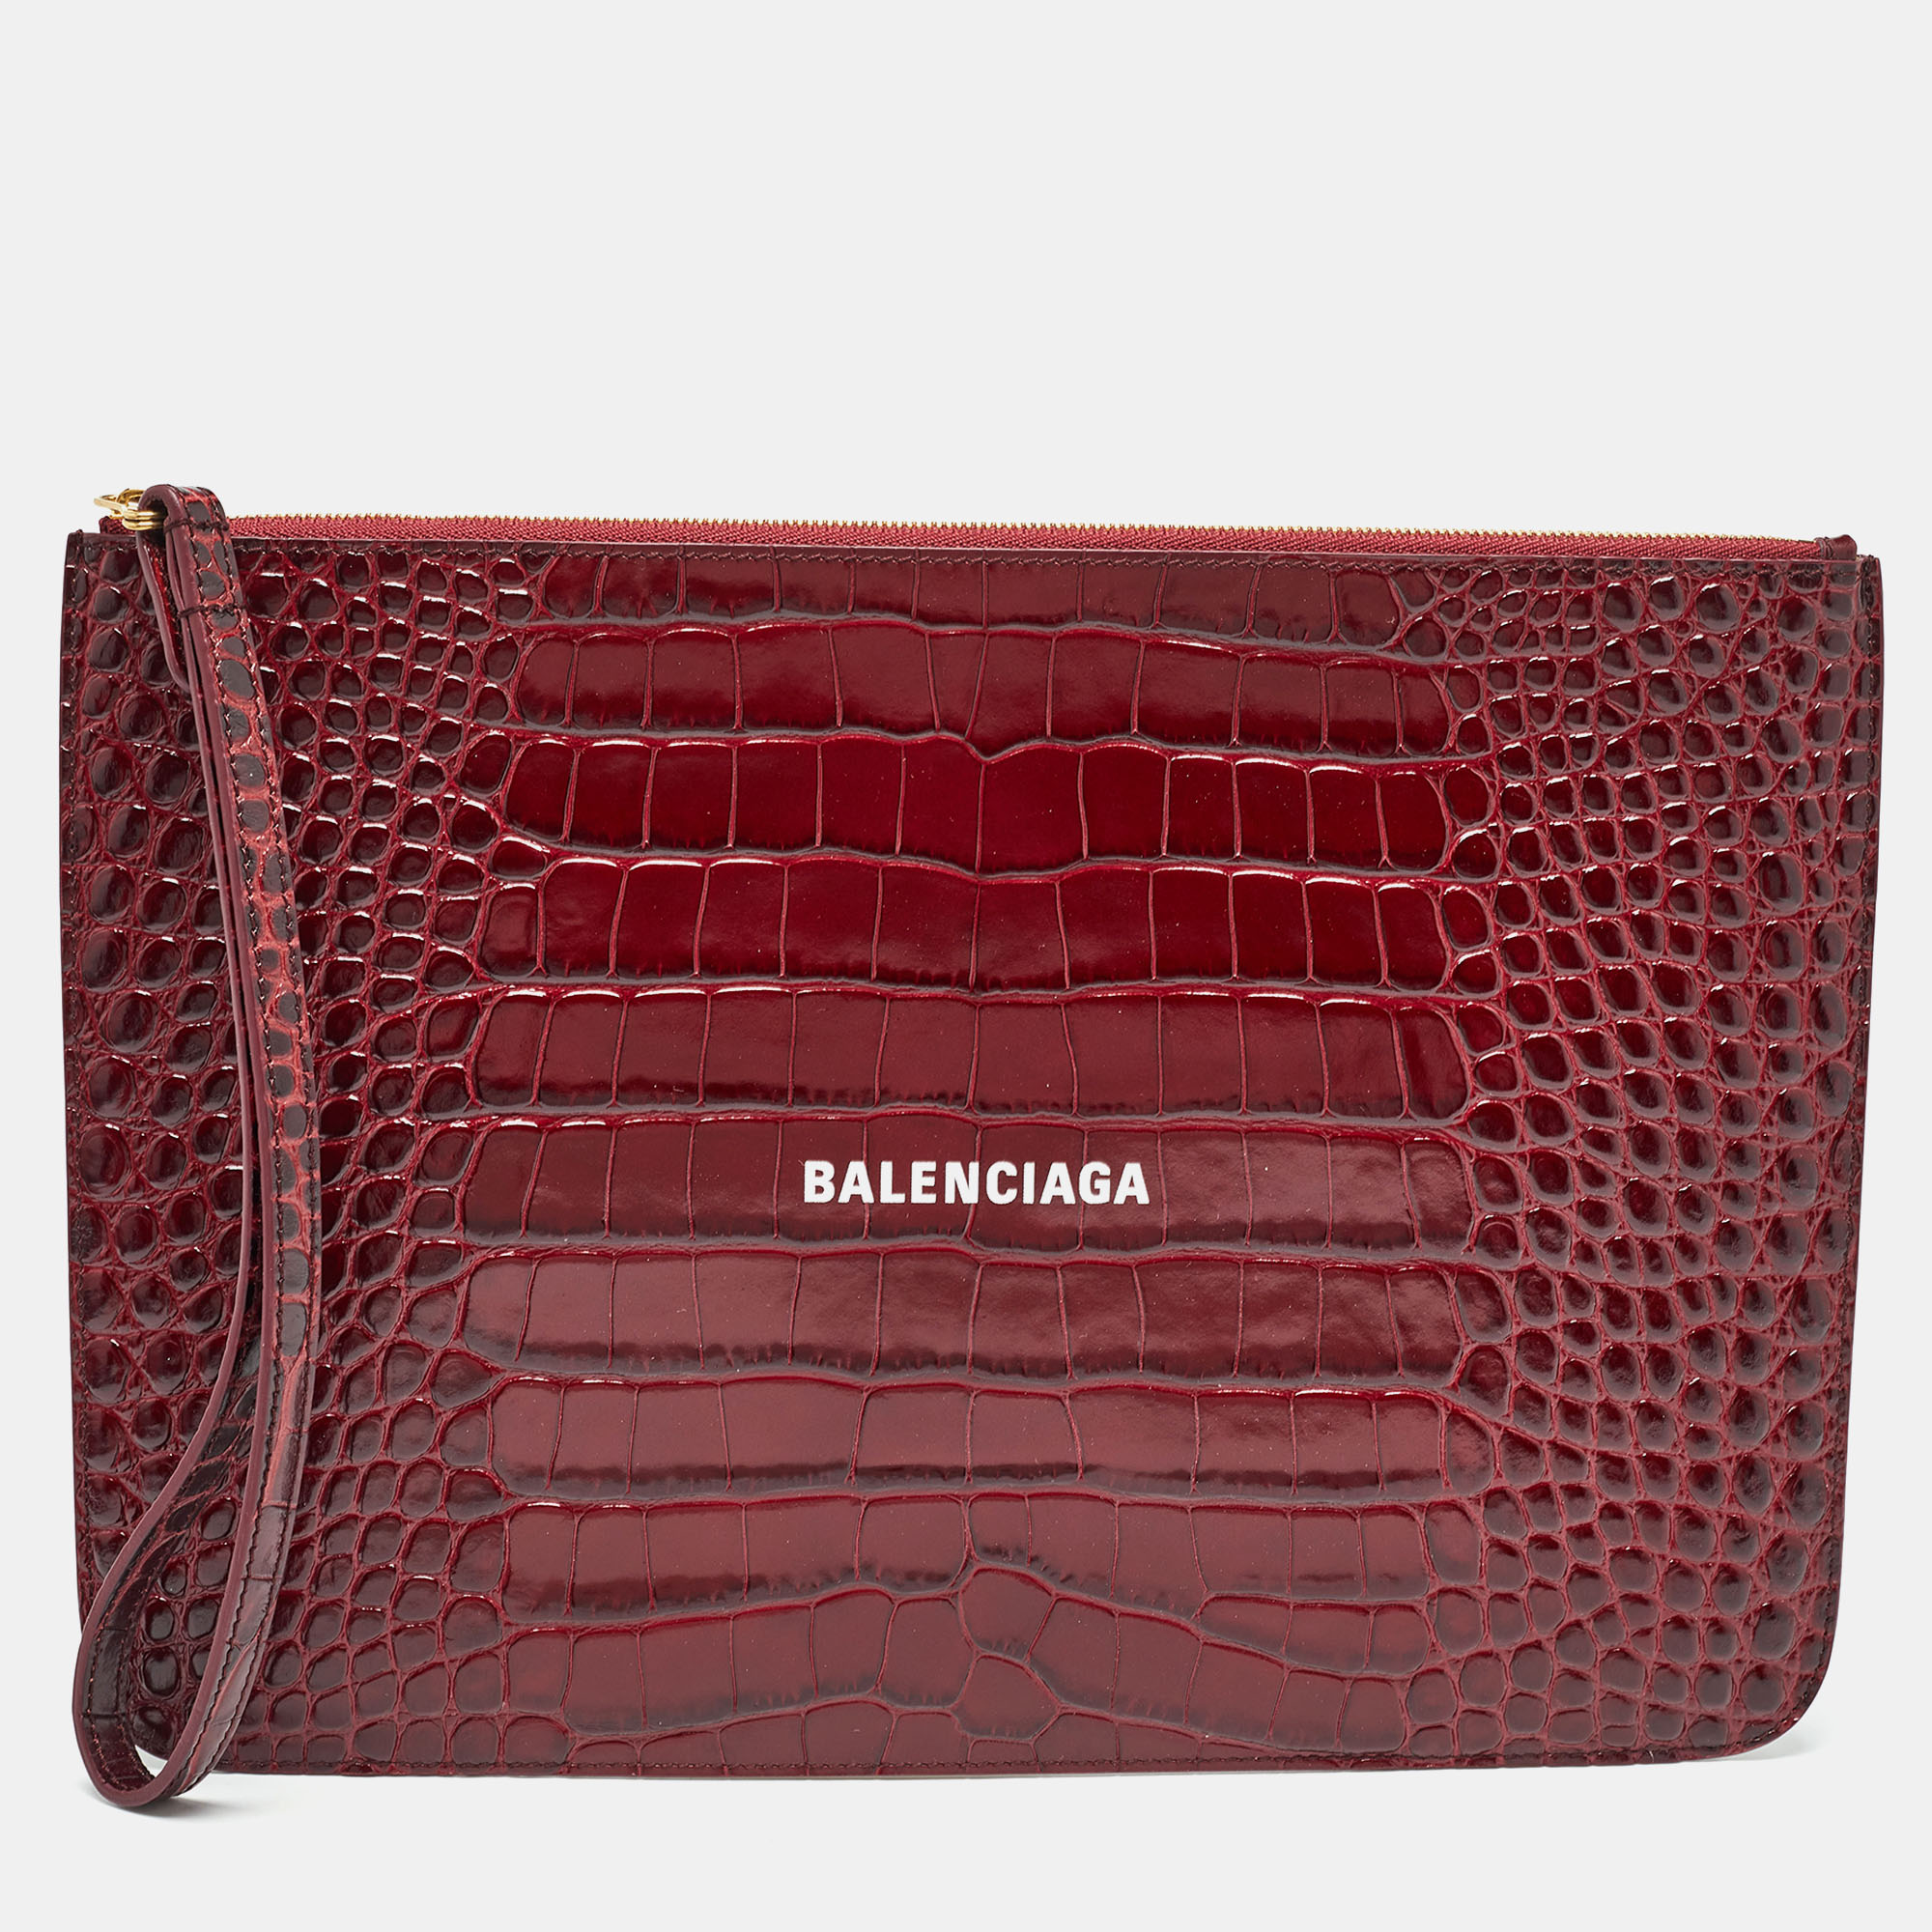 Pre-owned Balenciaga Red Croc Embossed Leather Flat Zip Pouch